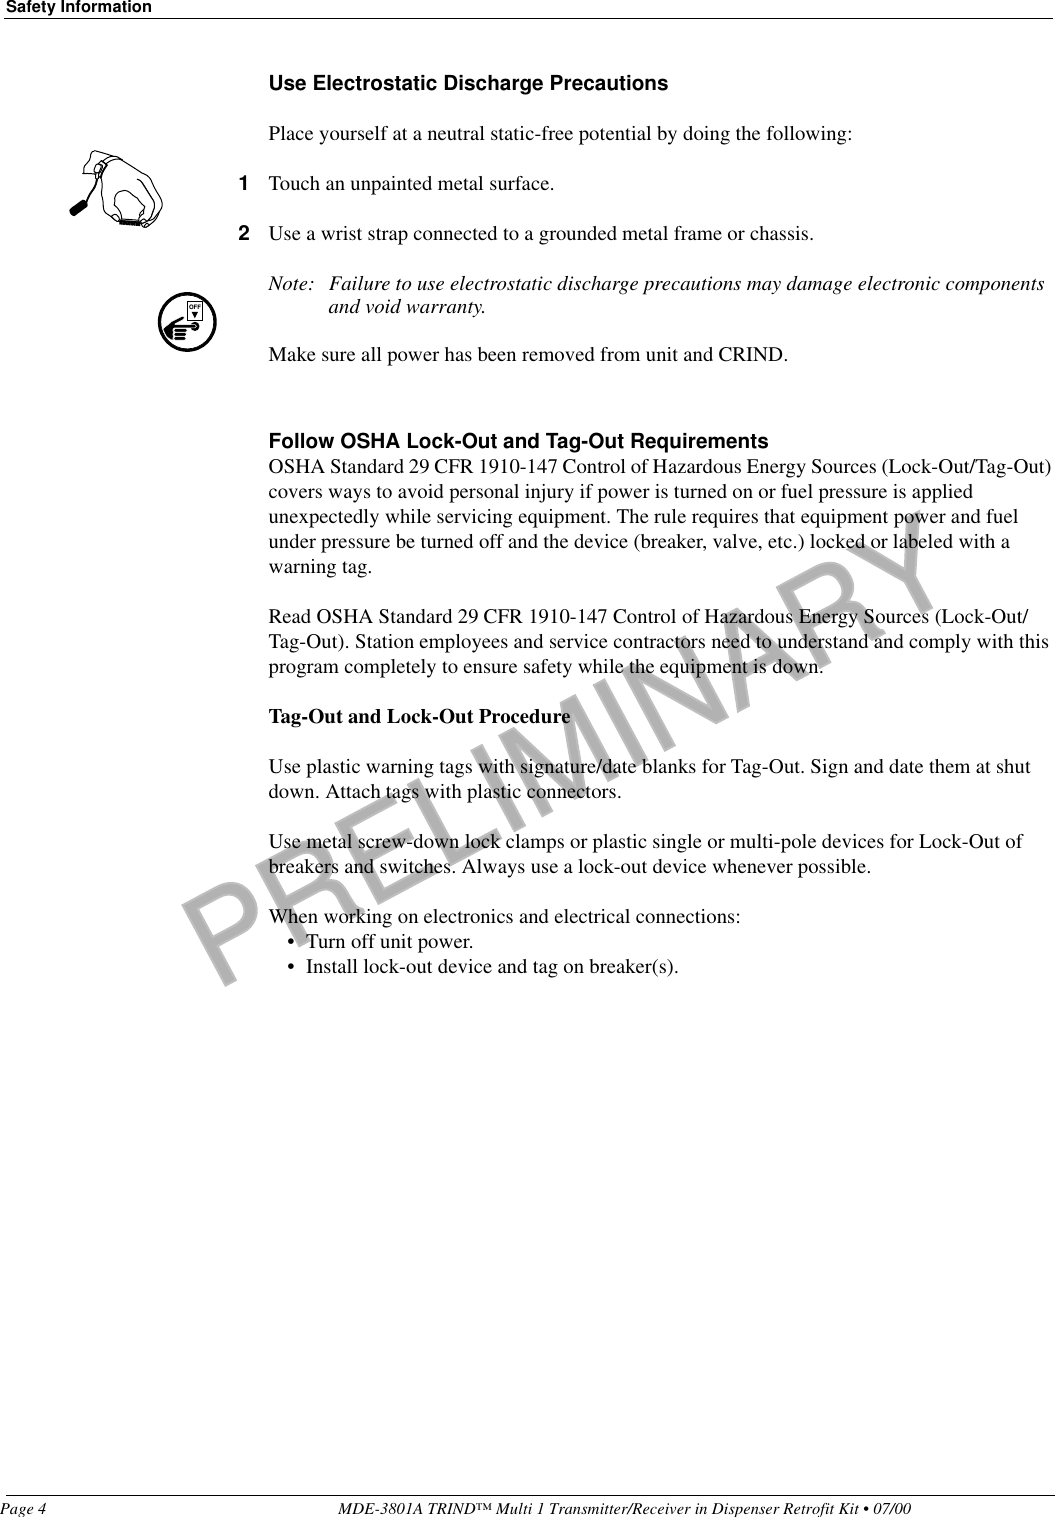 PRELIMINARYSafety InformationPage 4 MDE-3801A TRIND™ Multi 1 Transmitter/Receiver in Dispenser Retrofit Kit • 07/00Use Electrostatic Discharge PrecautionsPlace yourself at a neutral static-free potential by doing the following:1Touch an unpainted metal surface.2Use a wrist strap connected to a grounded metal frame or chassis.Note: Failure to use electrostatic discharge precautions may damage electronic components and void warranty.Make sure all power has been removed from unit and CRIND.Follow OSHA Lock-Out and Tag-Out RequirementsOSHA Standard 29 CFR 1910-147 Control of Hazardous Energy Sources (Lock-Out/Tag-Out) covers ways to avoid personal injury if power is turned on or fuel pressure is applied unexpectedly while servicing equipment. The rule requires that equipment power and fuel under pressure be turned off and the device (breaker, valve, etc.) locked or labeled with a warning tag.Read OSHA Standard 29 CFR 1910-147 Control of Hazardous Energy Sources (Lock-Out/Tag-Out). Station employees and service contractors need to understand and comply with this program completely to ensure safety while the equipment is down. Tag-Out and Lock-Out ProcedureUse plastic warning tags with signature/date blanks for Tag-Out. Sign and date them at shut down. Attach tags with plastic connectors.Use metal screw-down lock clamps or plastic single or multi-pole devices for Lock-Out of breakers and switches. Always use a lock-out device whenever possible.When working on electronics and electrical connections:• Turn off unit power.• Install lock-out device and tag on breaker(s).OFF